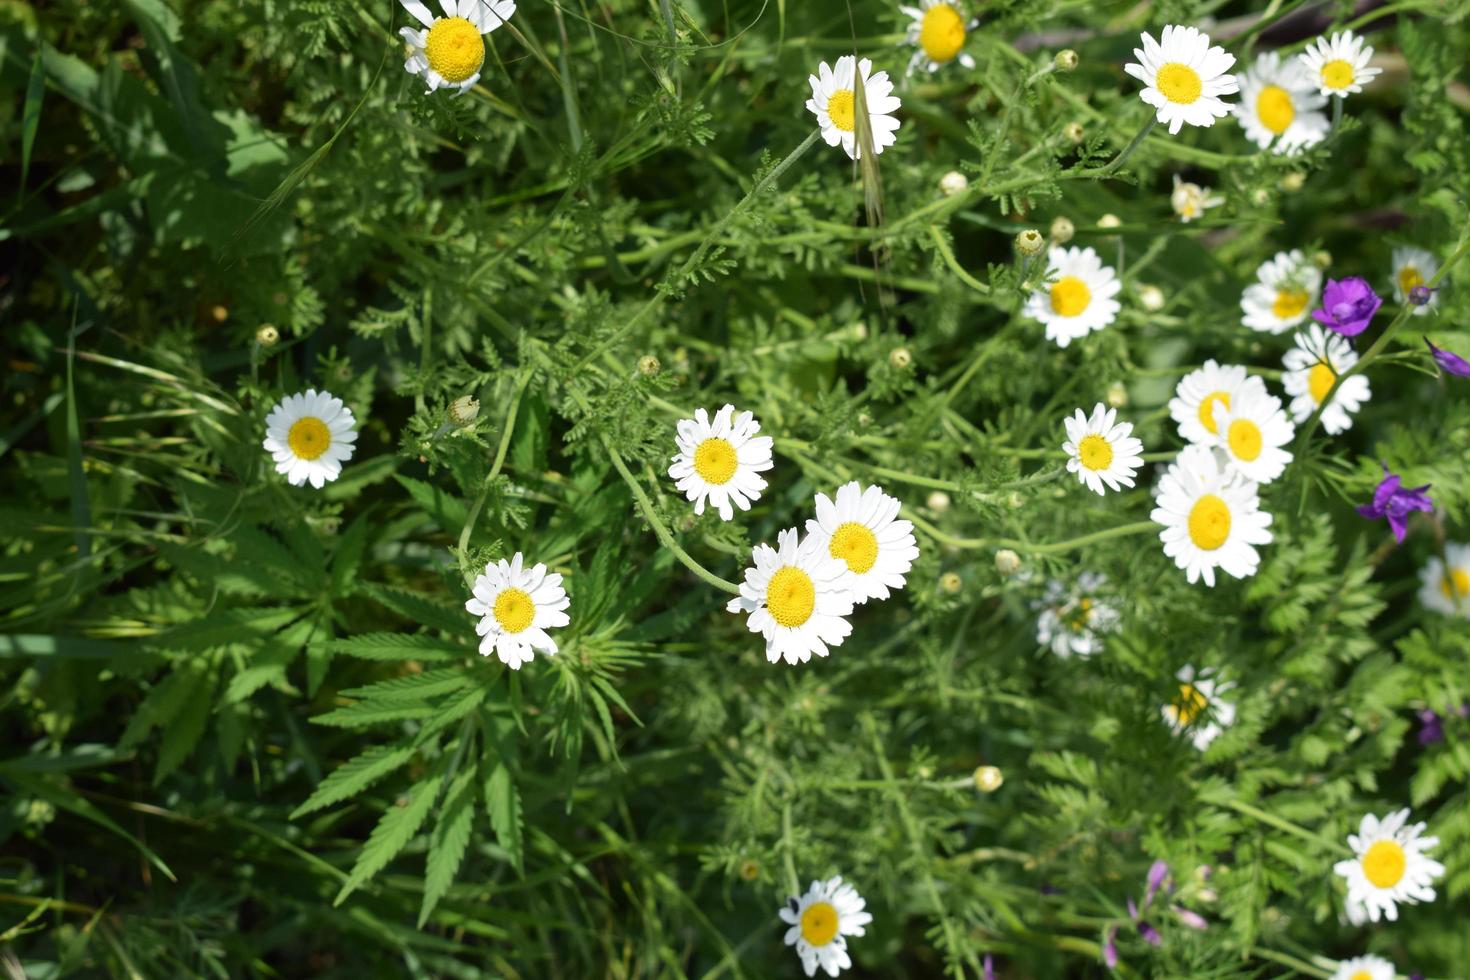 Little fresh daisies in Latin - leucanthemum vulgare growing up in garden. Sunny afternoon with fresh wild flowers. Oxeye daisy with white petals in blooming period during hot sumemr day. photo